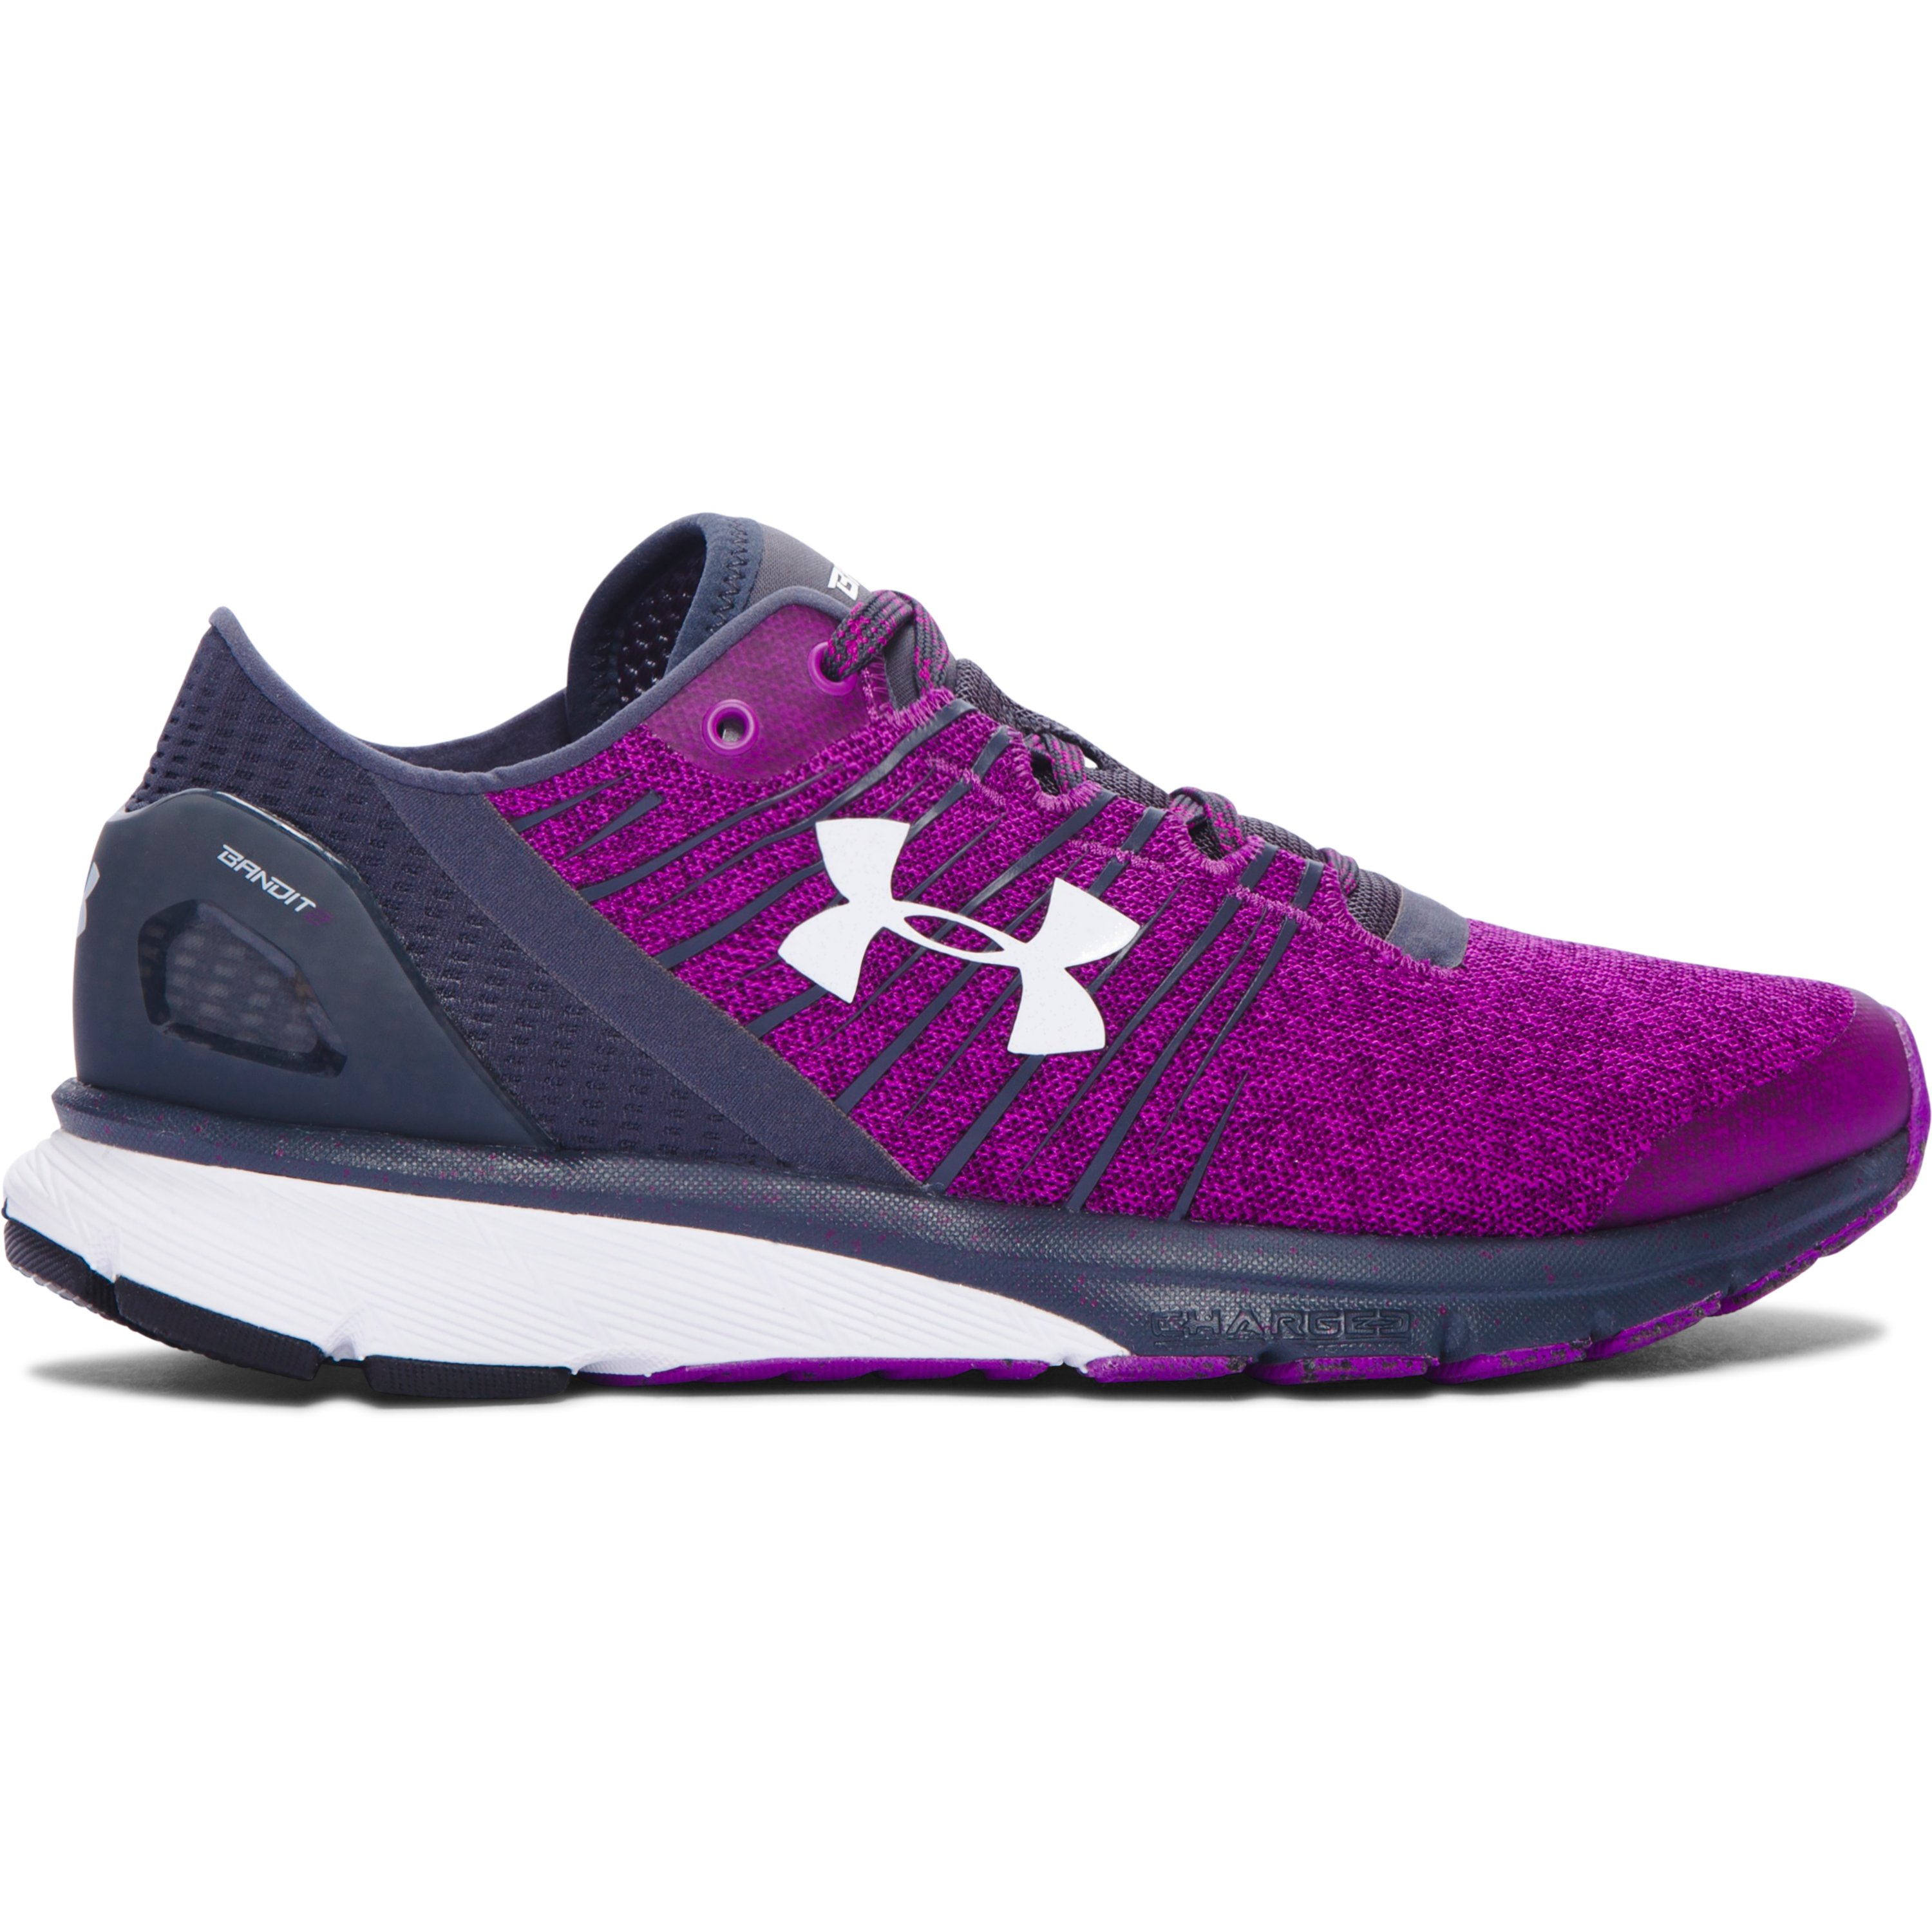 Lyst - Under Armour Women's Ua Charged Bandit 2 Running Shoes in Purple